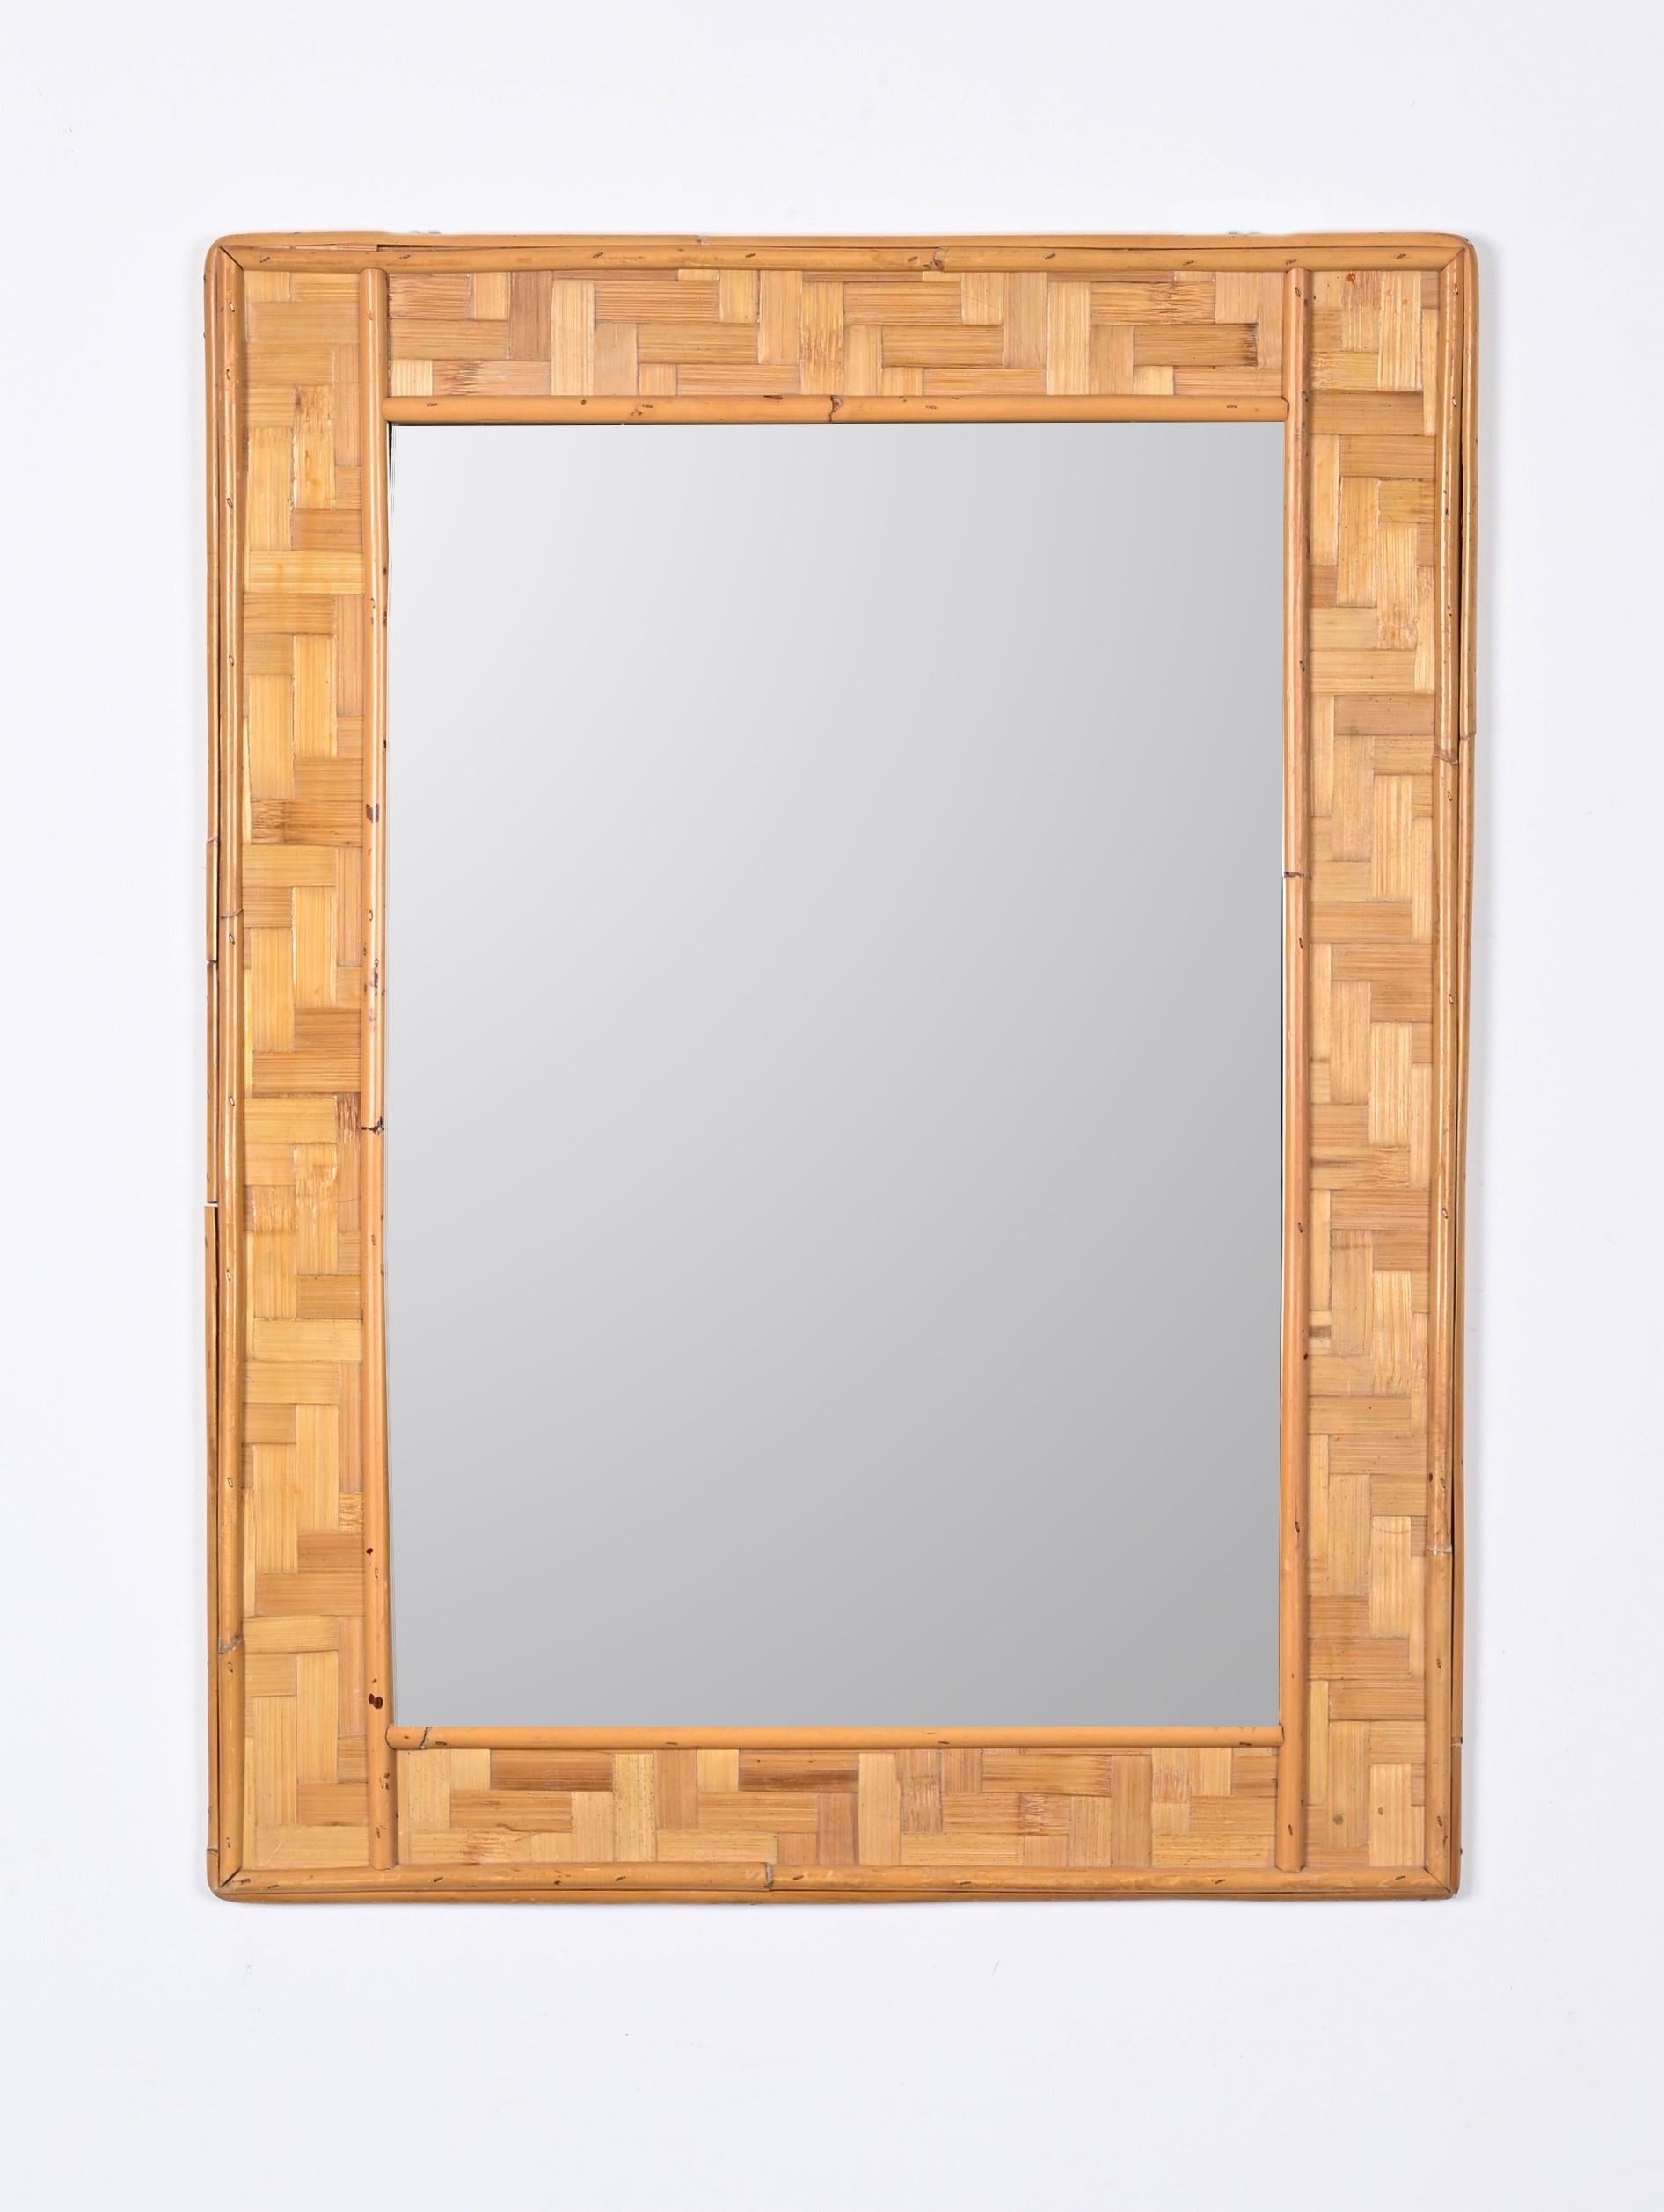 Midcentury Rectangular Bamboo and Woven Rattan Frame Italian Mirror, 1960s For Sale 2